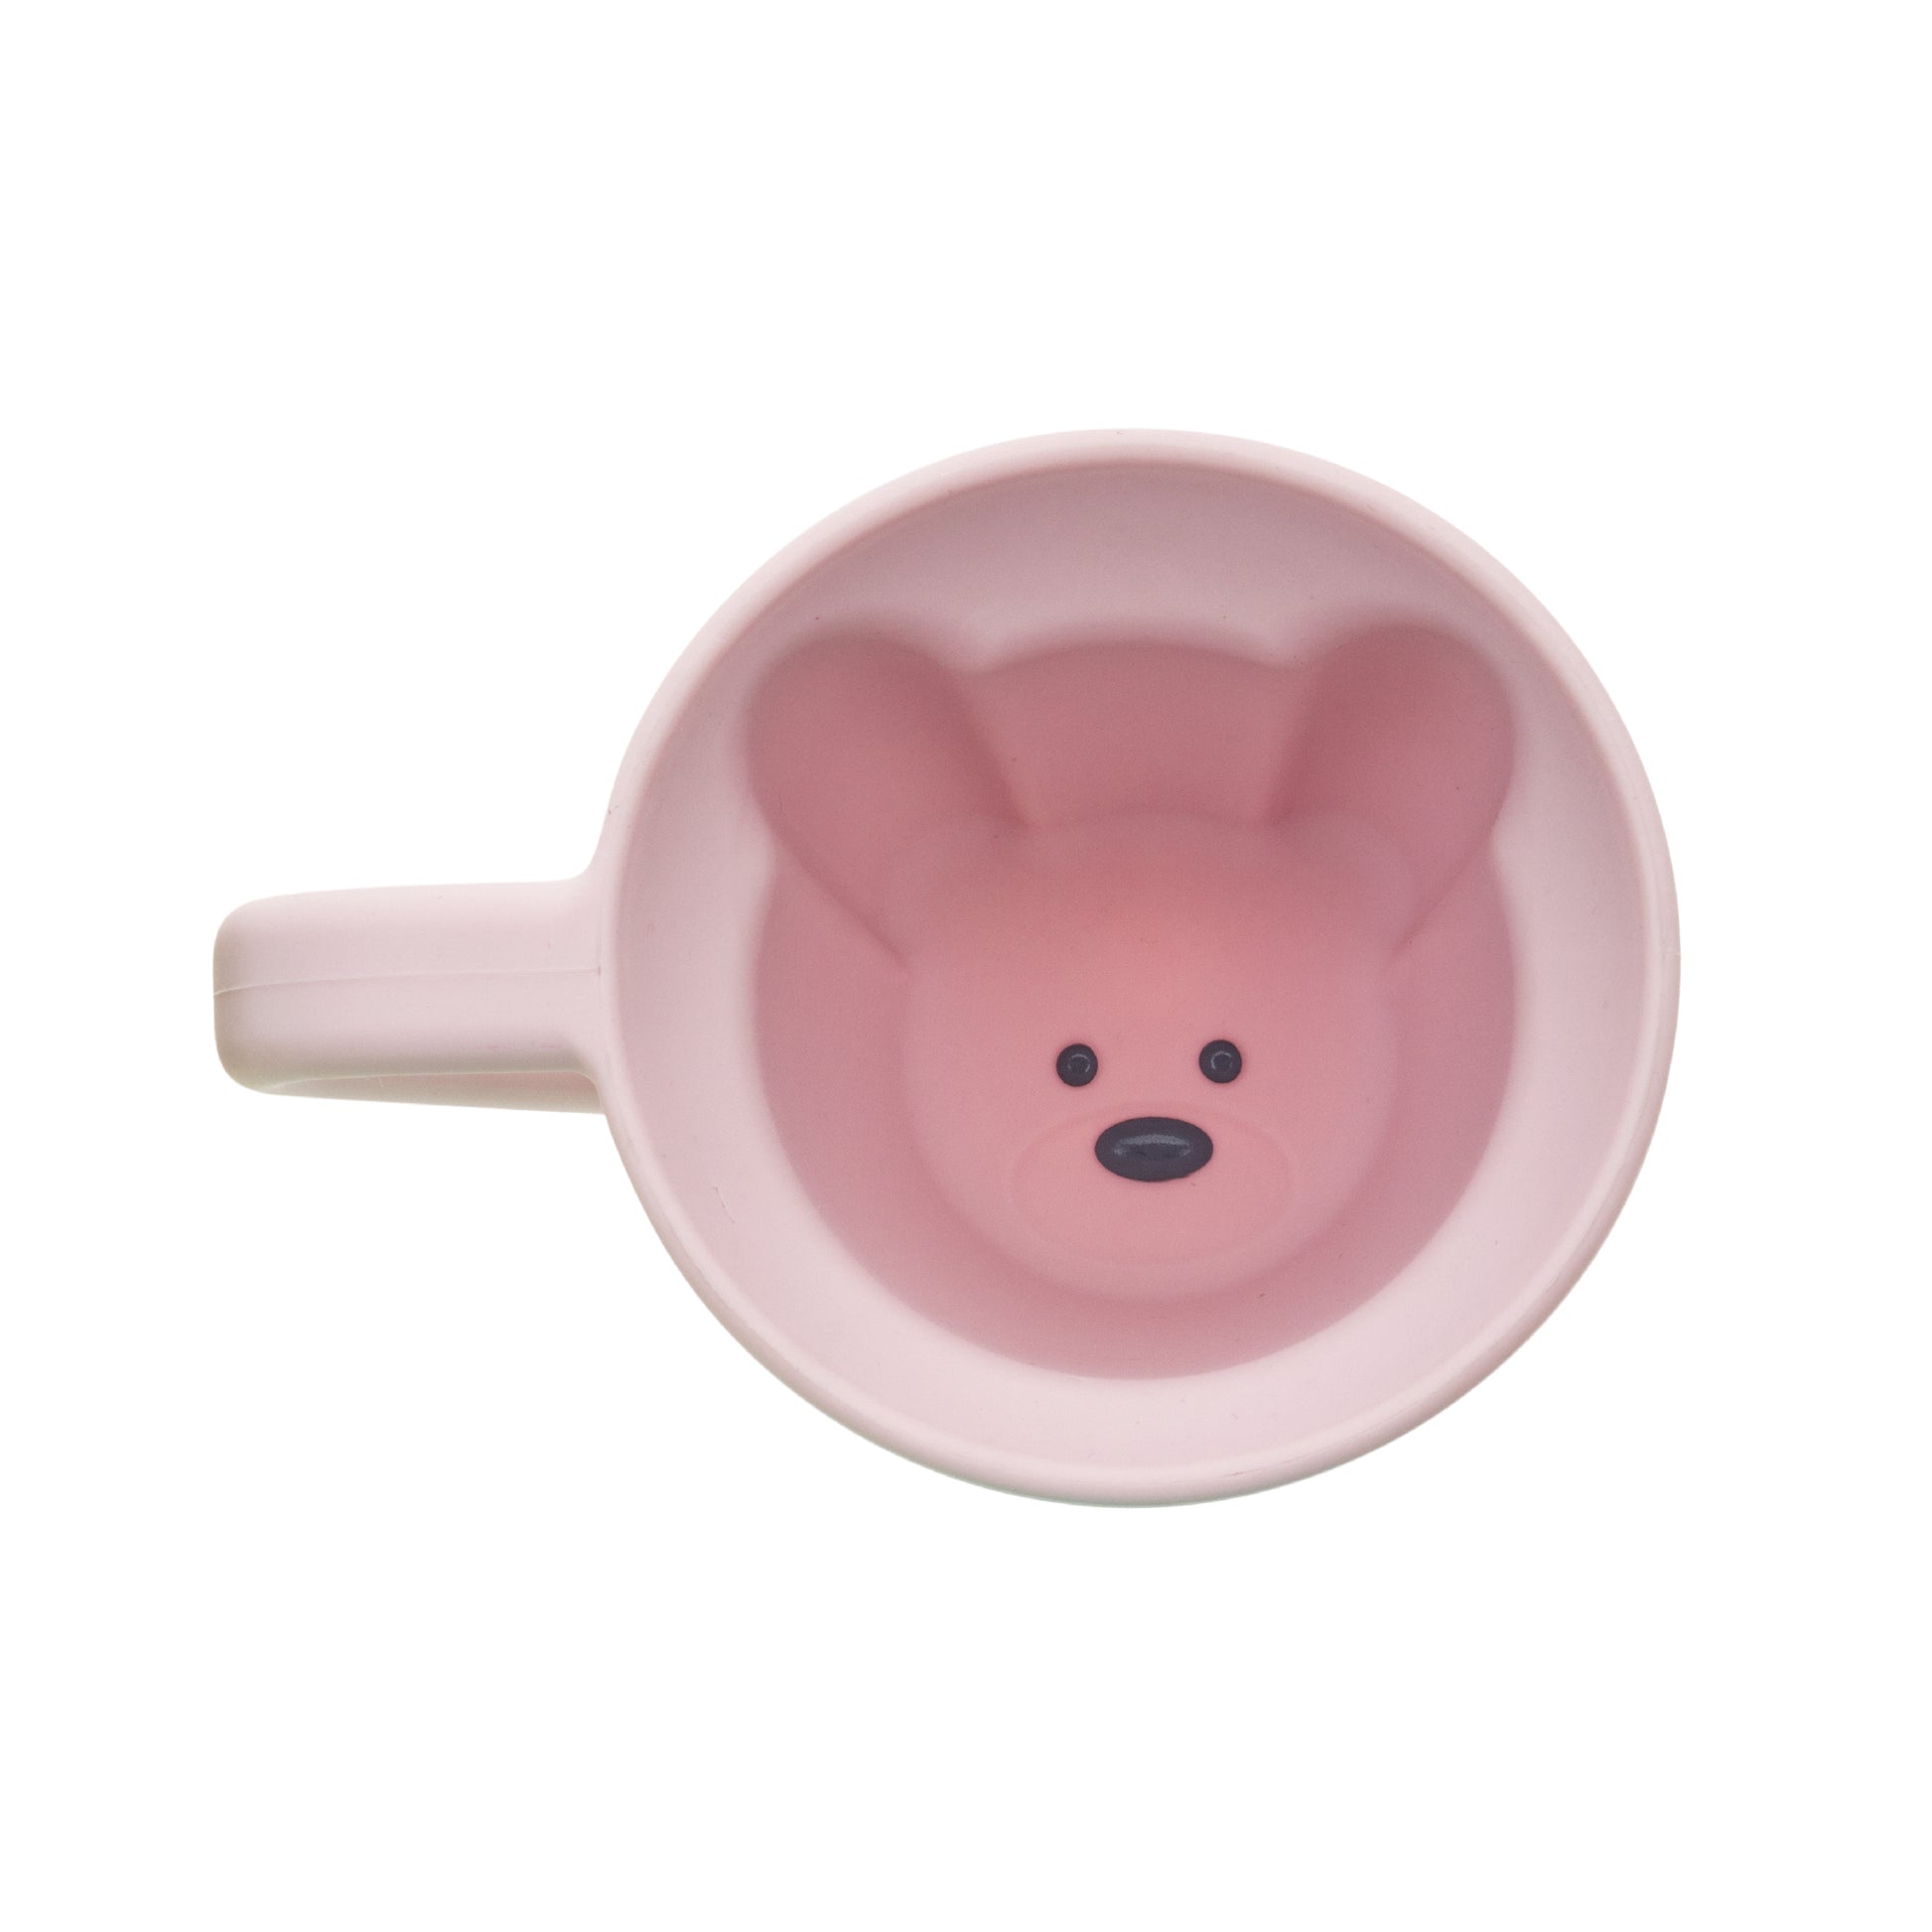 Melii Pretend Play Pink Bear Mug for Kids - Imaginative Silicone Cup with Magical Bear-Shaped Beverage, Perfect for Hot and Cold Drinks - Durable, BPA-Free